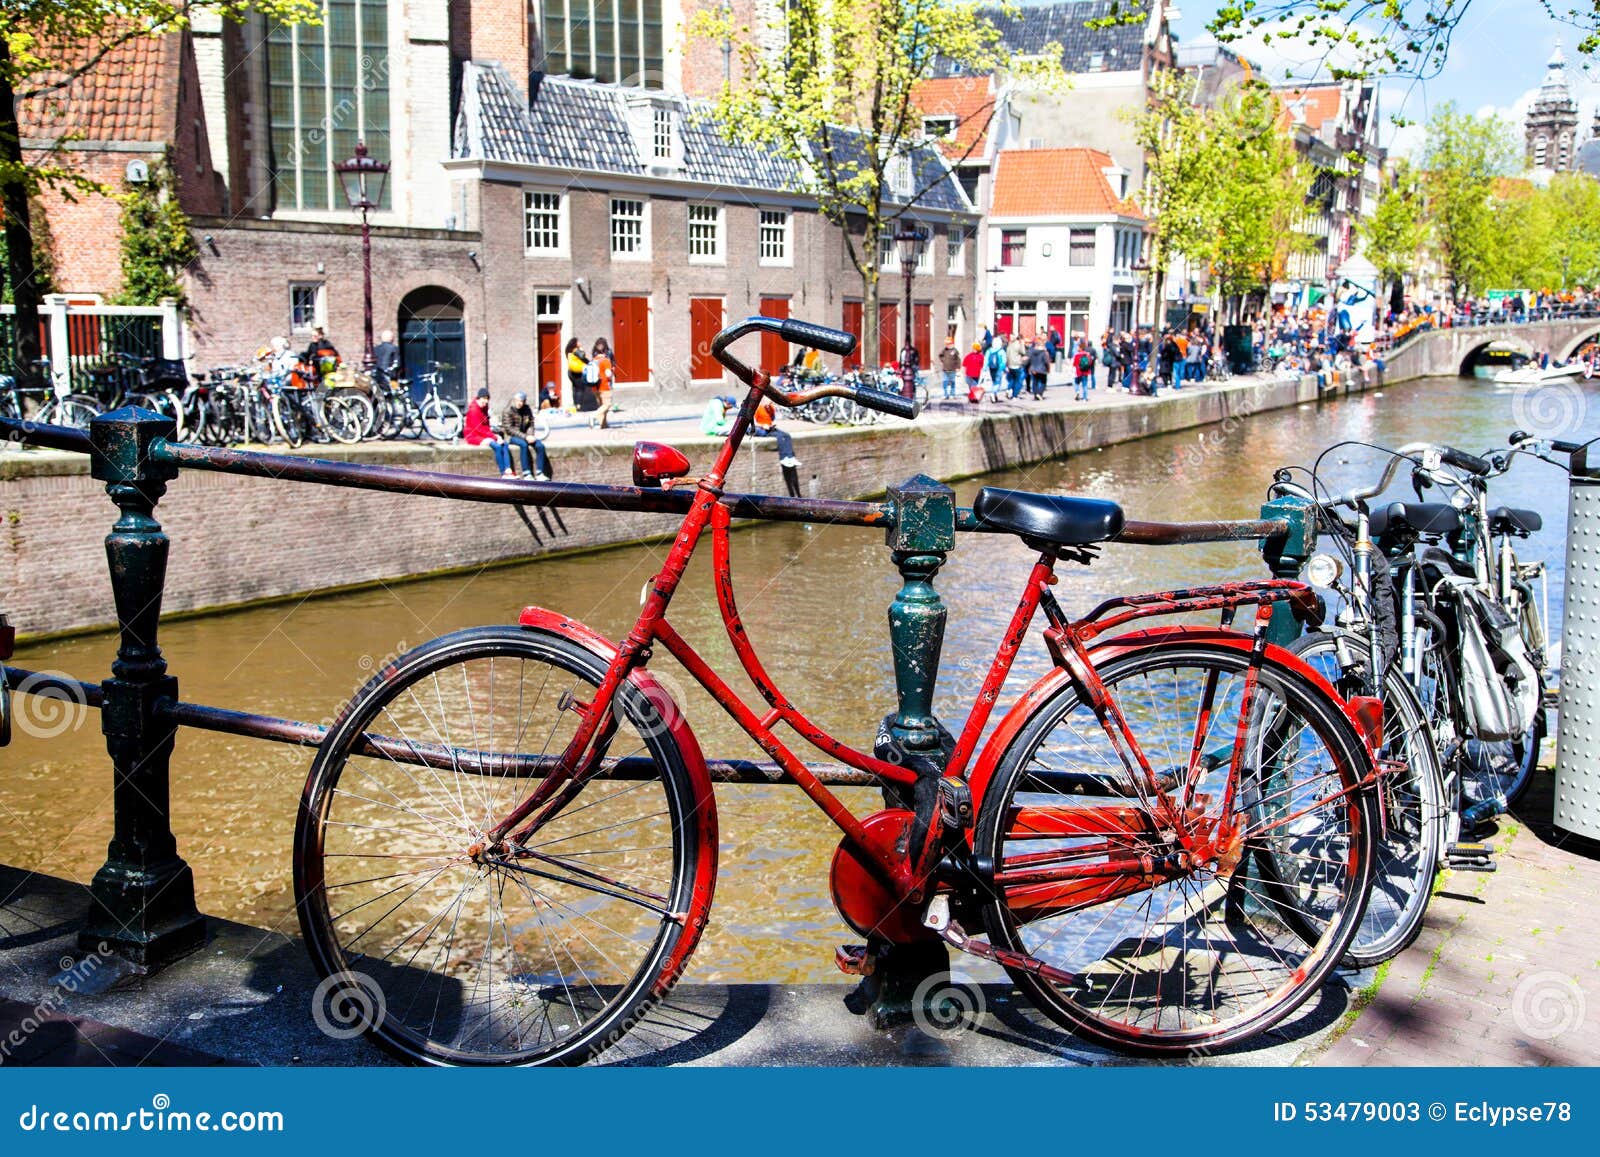 Vintage Red Bicycle Near a Canal in Amsterdam Stock Image - Image of ...